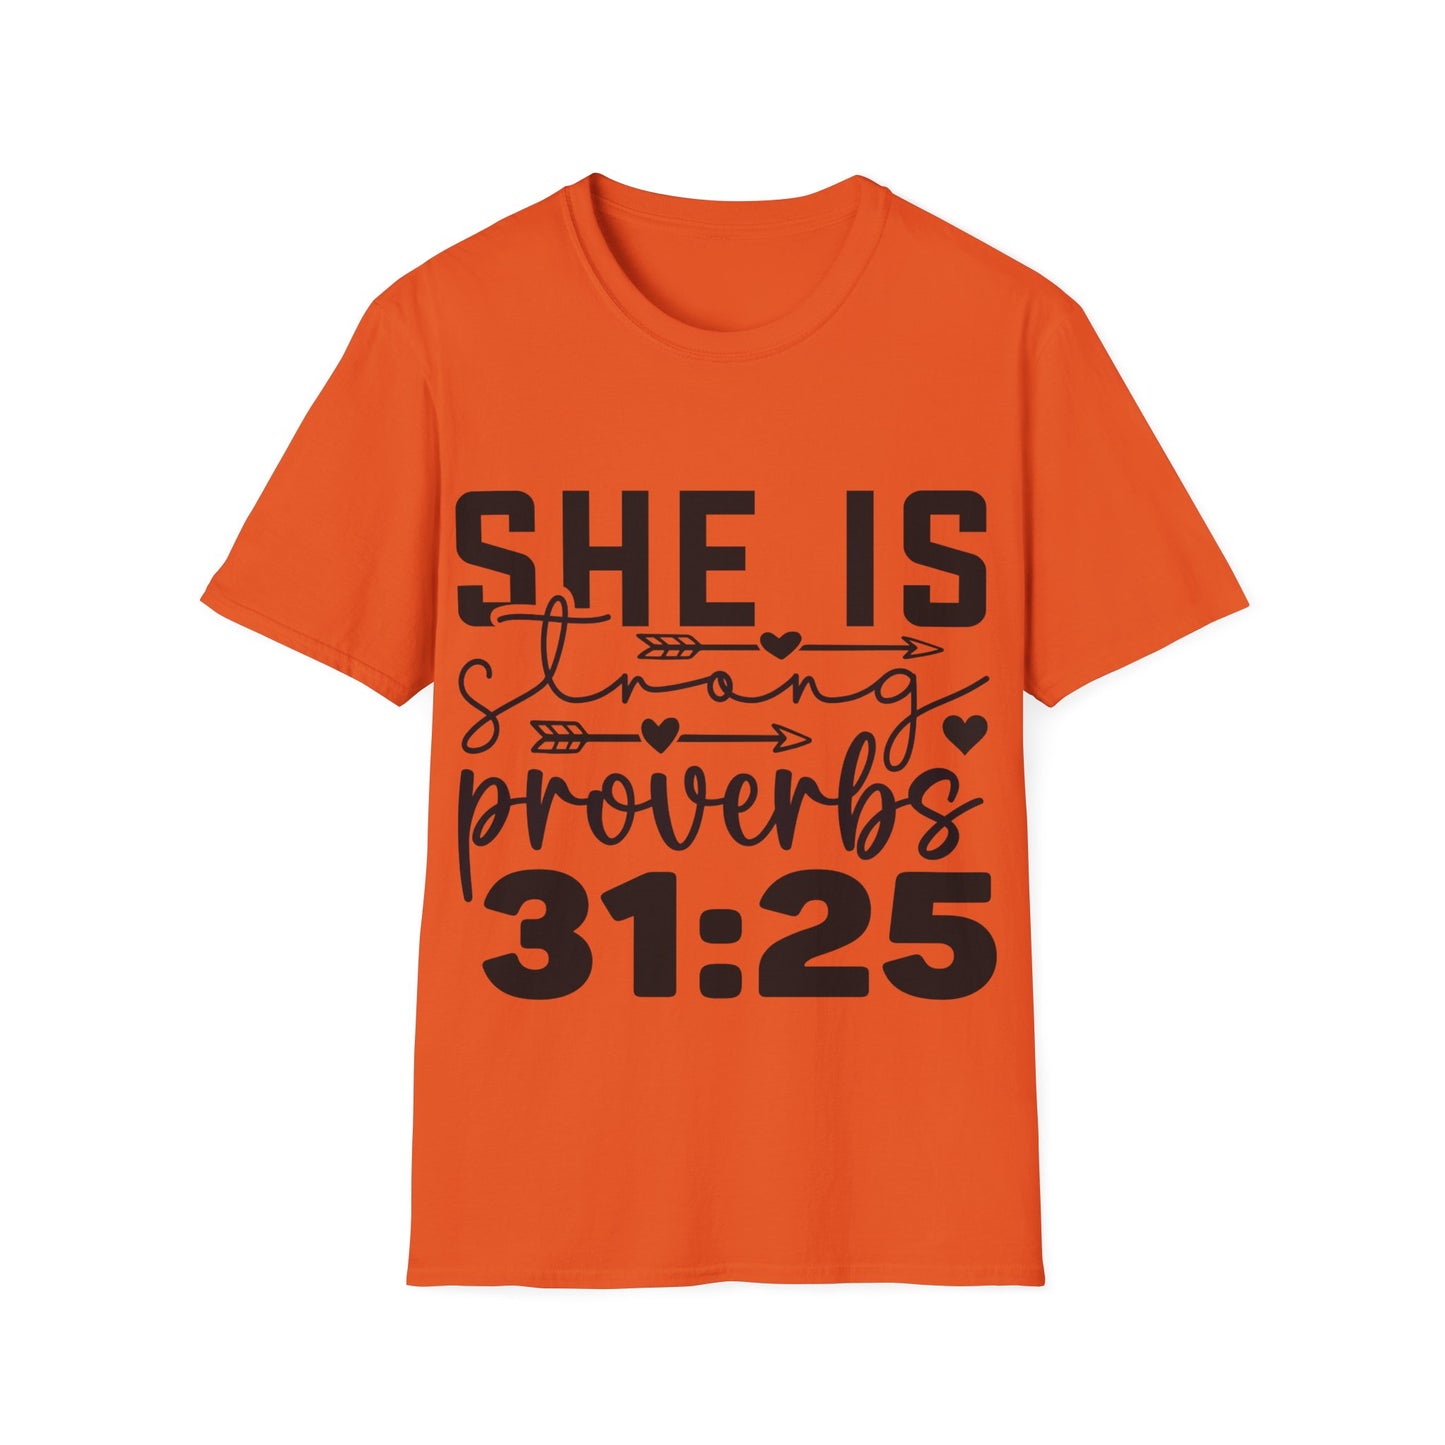 She Is Strong Proverbs 31:25 (2) Triple Viking T-Shirt